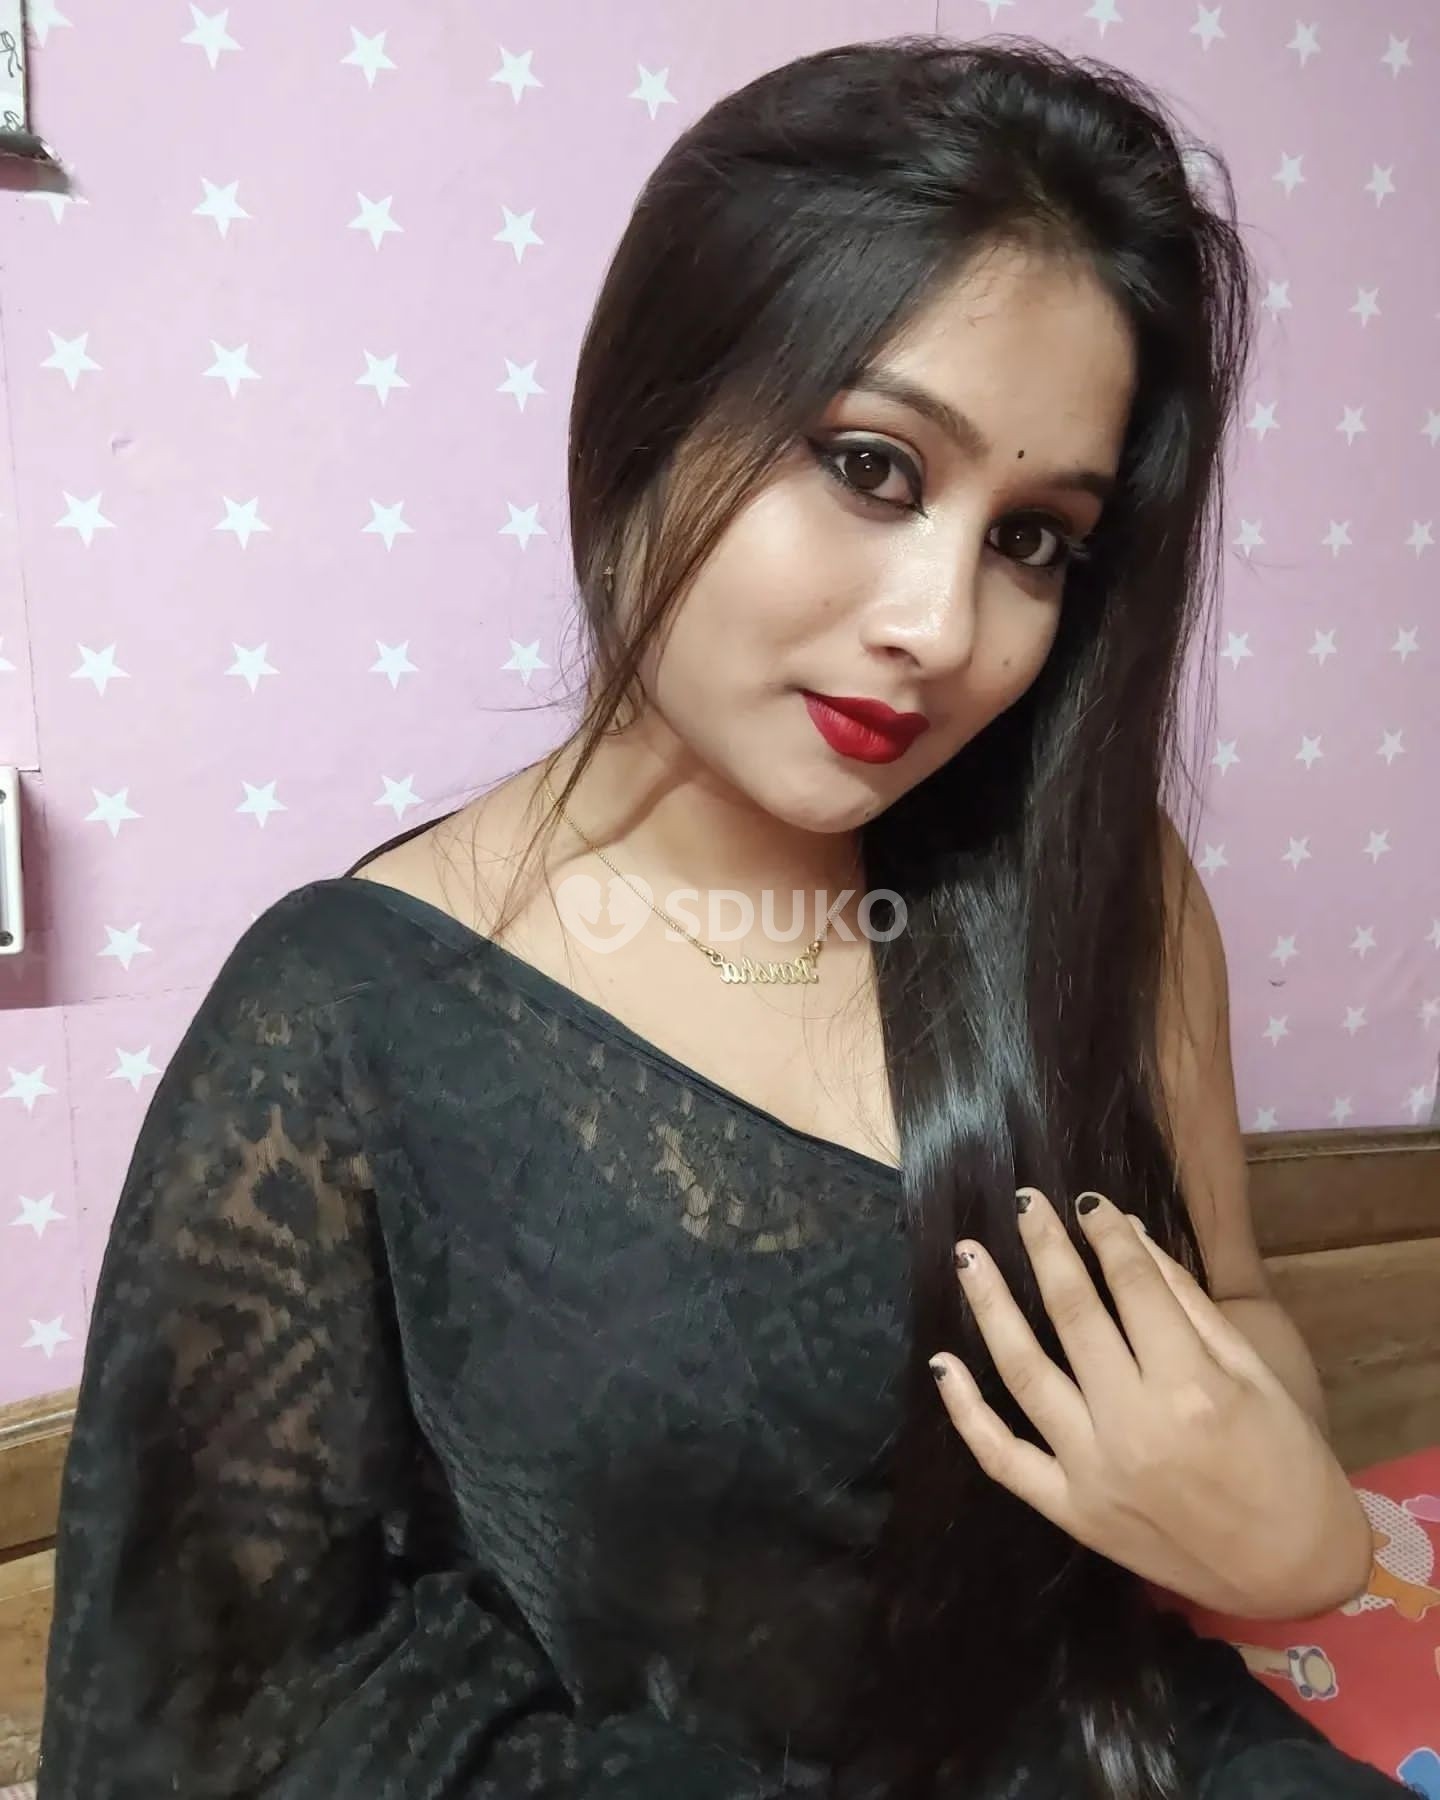 NASHIK 🆑 RINU INDEPENDENCE COLLEGE GIRLS HOUSEWIFE ANYTIME CALL ME 24*7 AVAILABLE